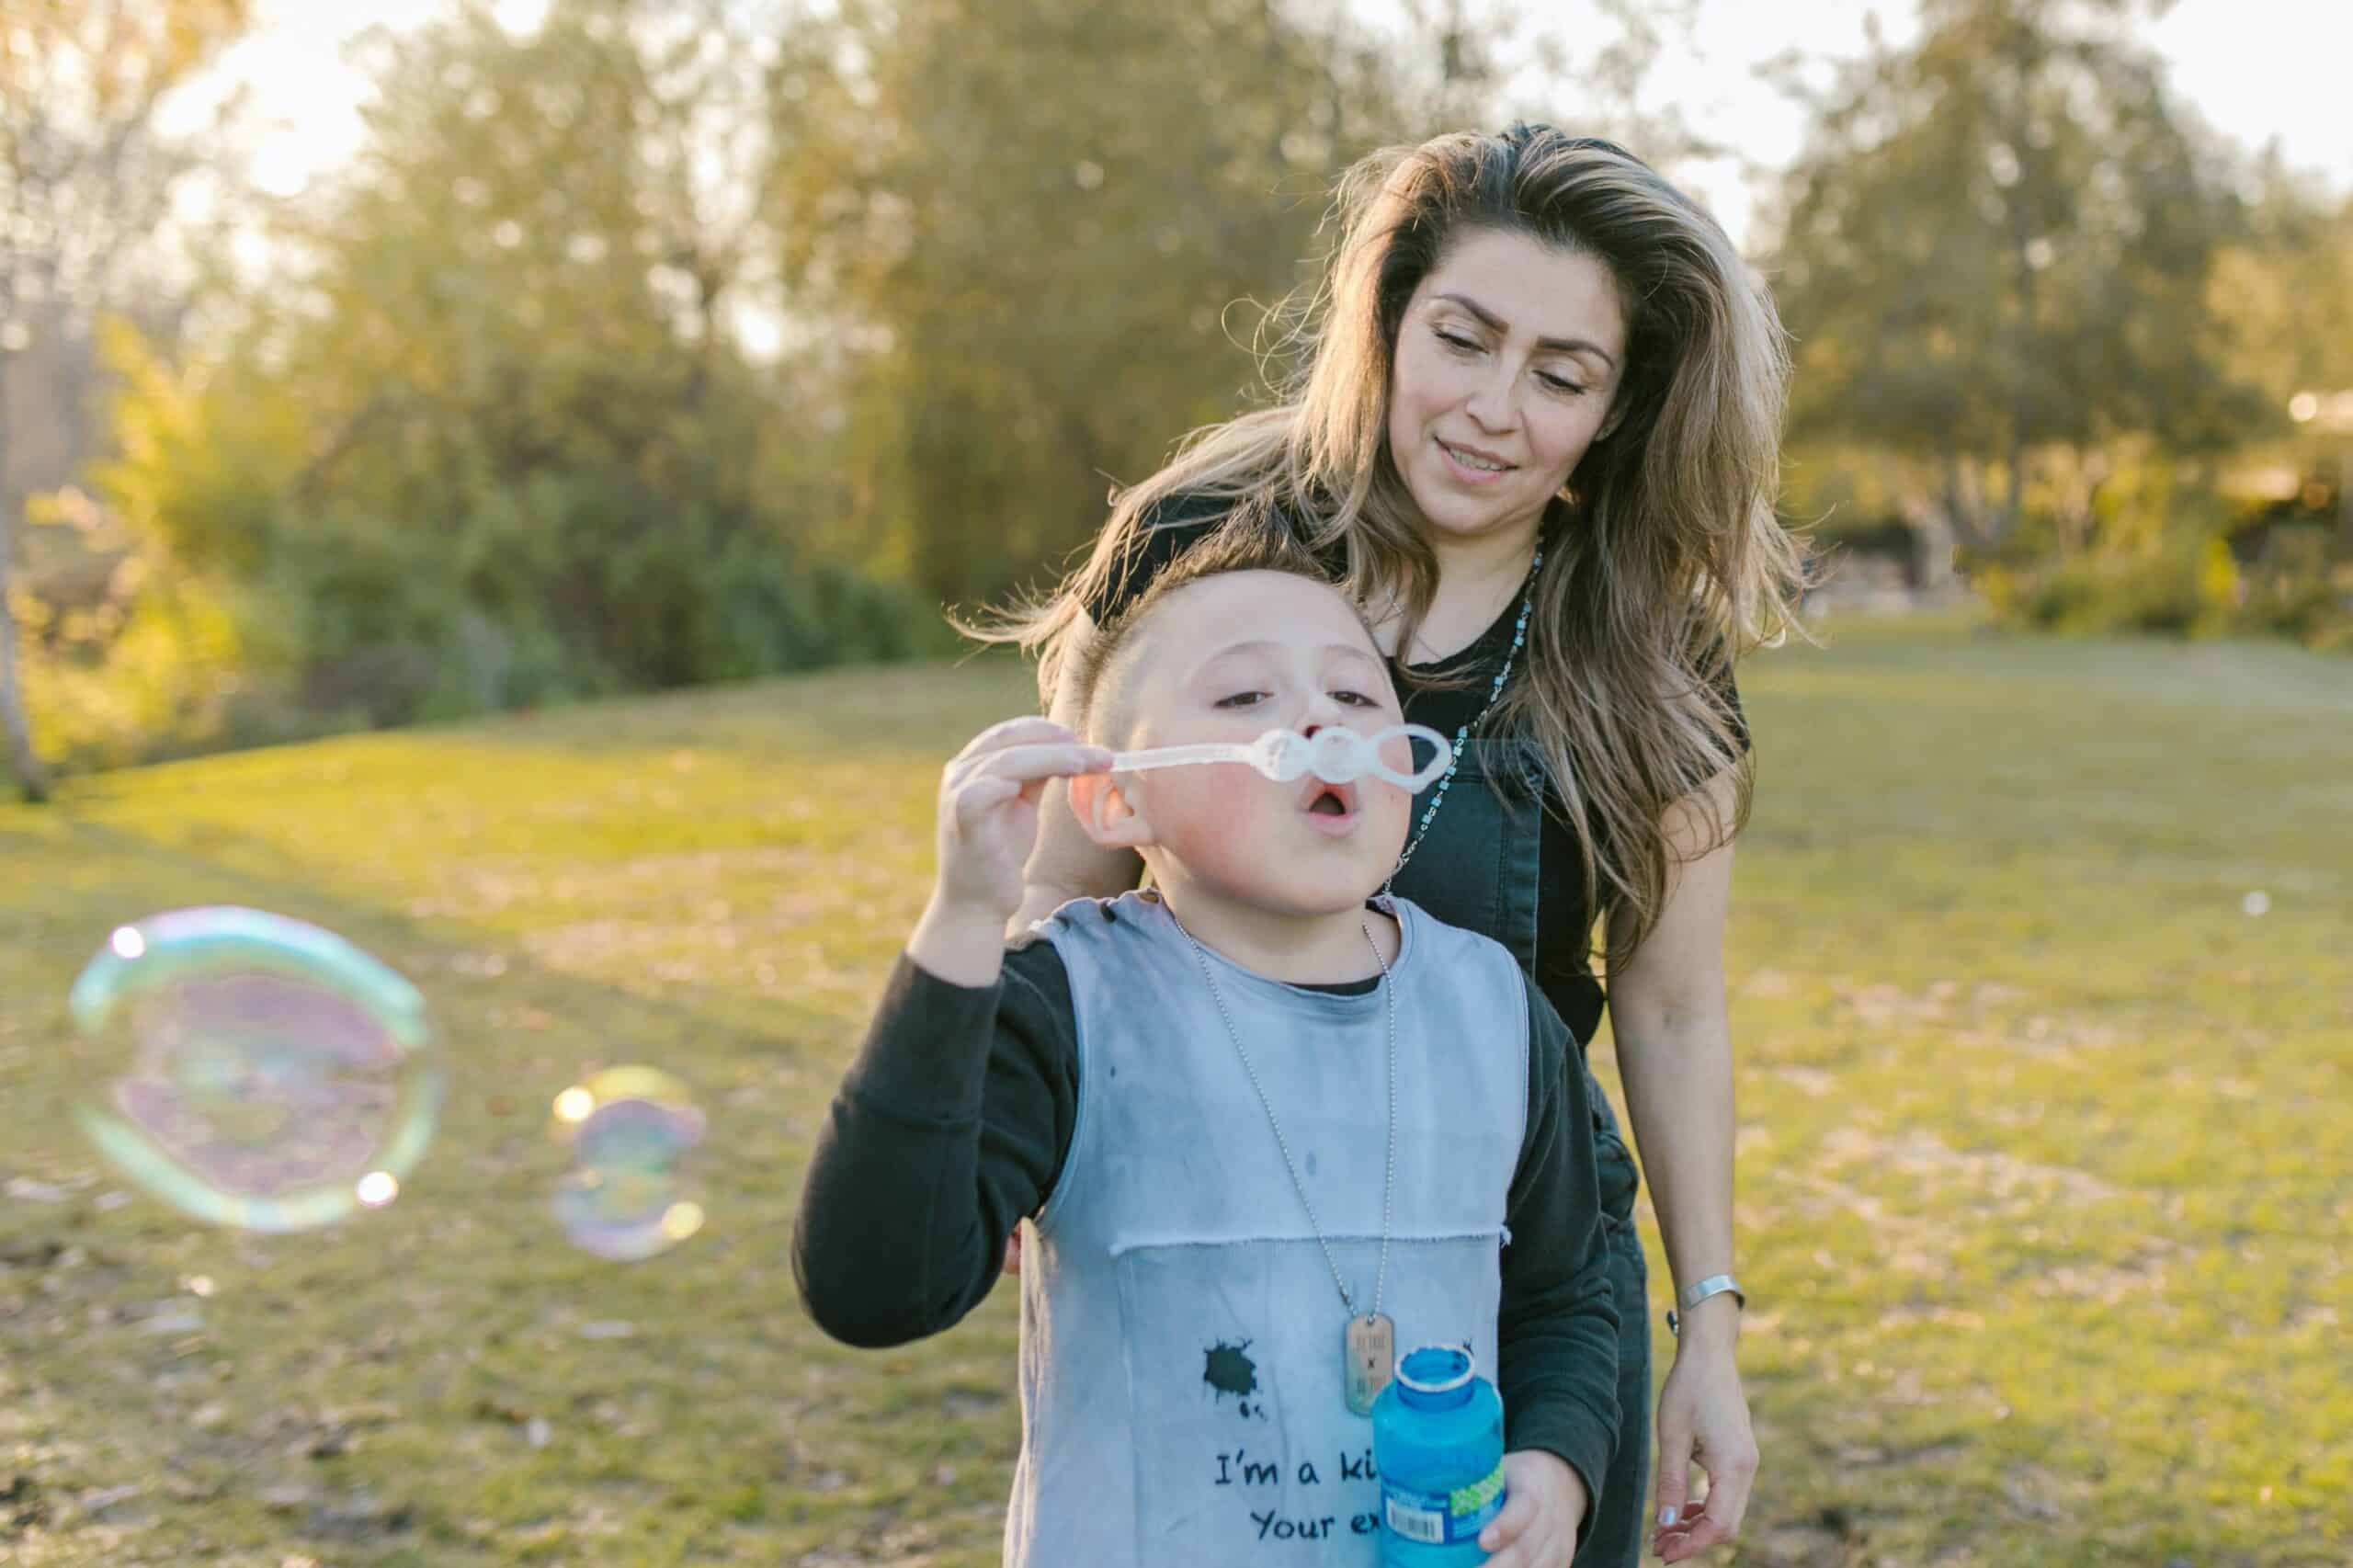 Cheerful nanny and a boy having a delightful time blowing bubbles in a park, showcasing the immediate availability and trustworthy care provided by Lifetime of Love Nannies